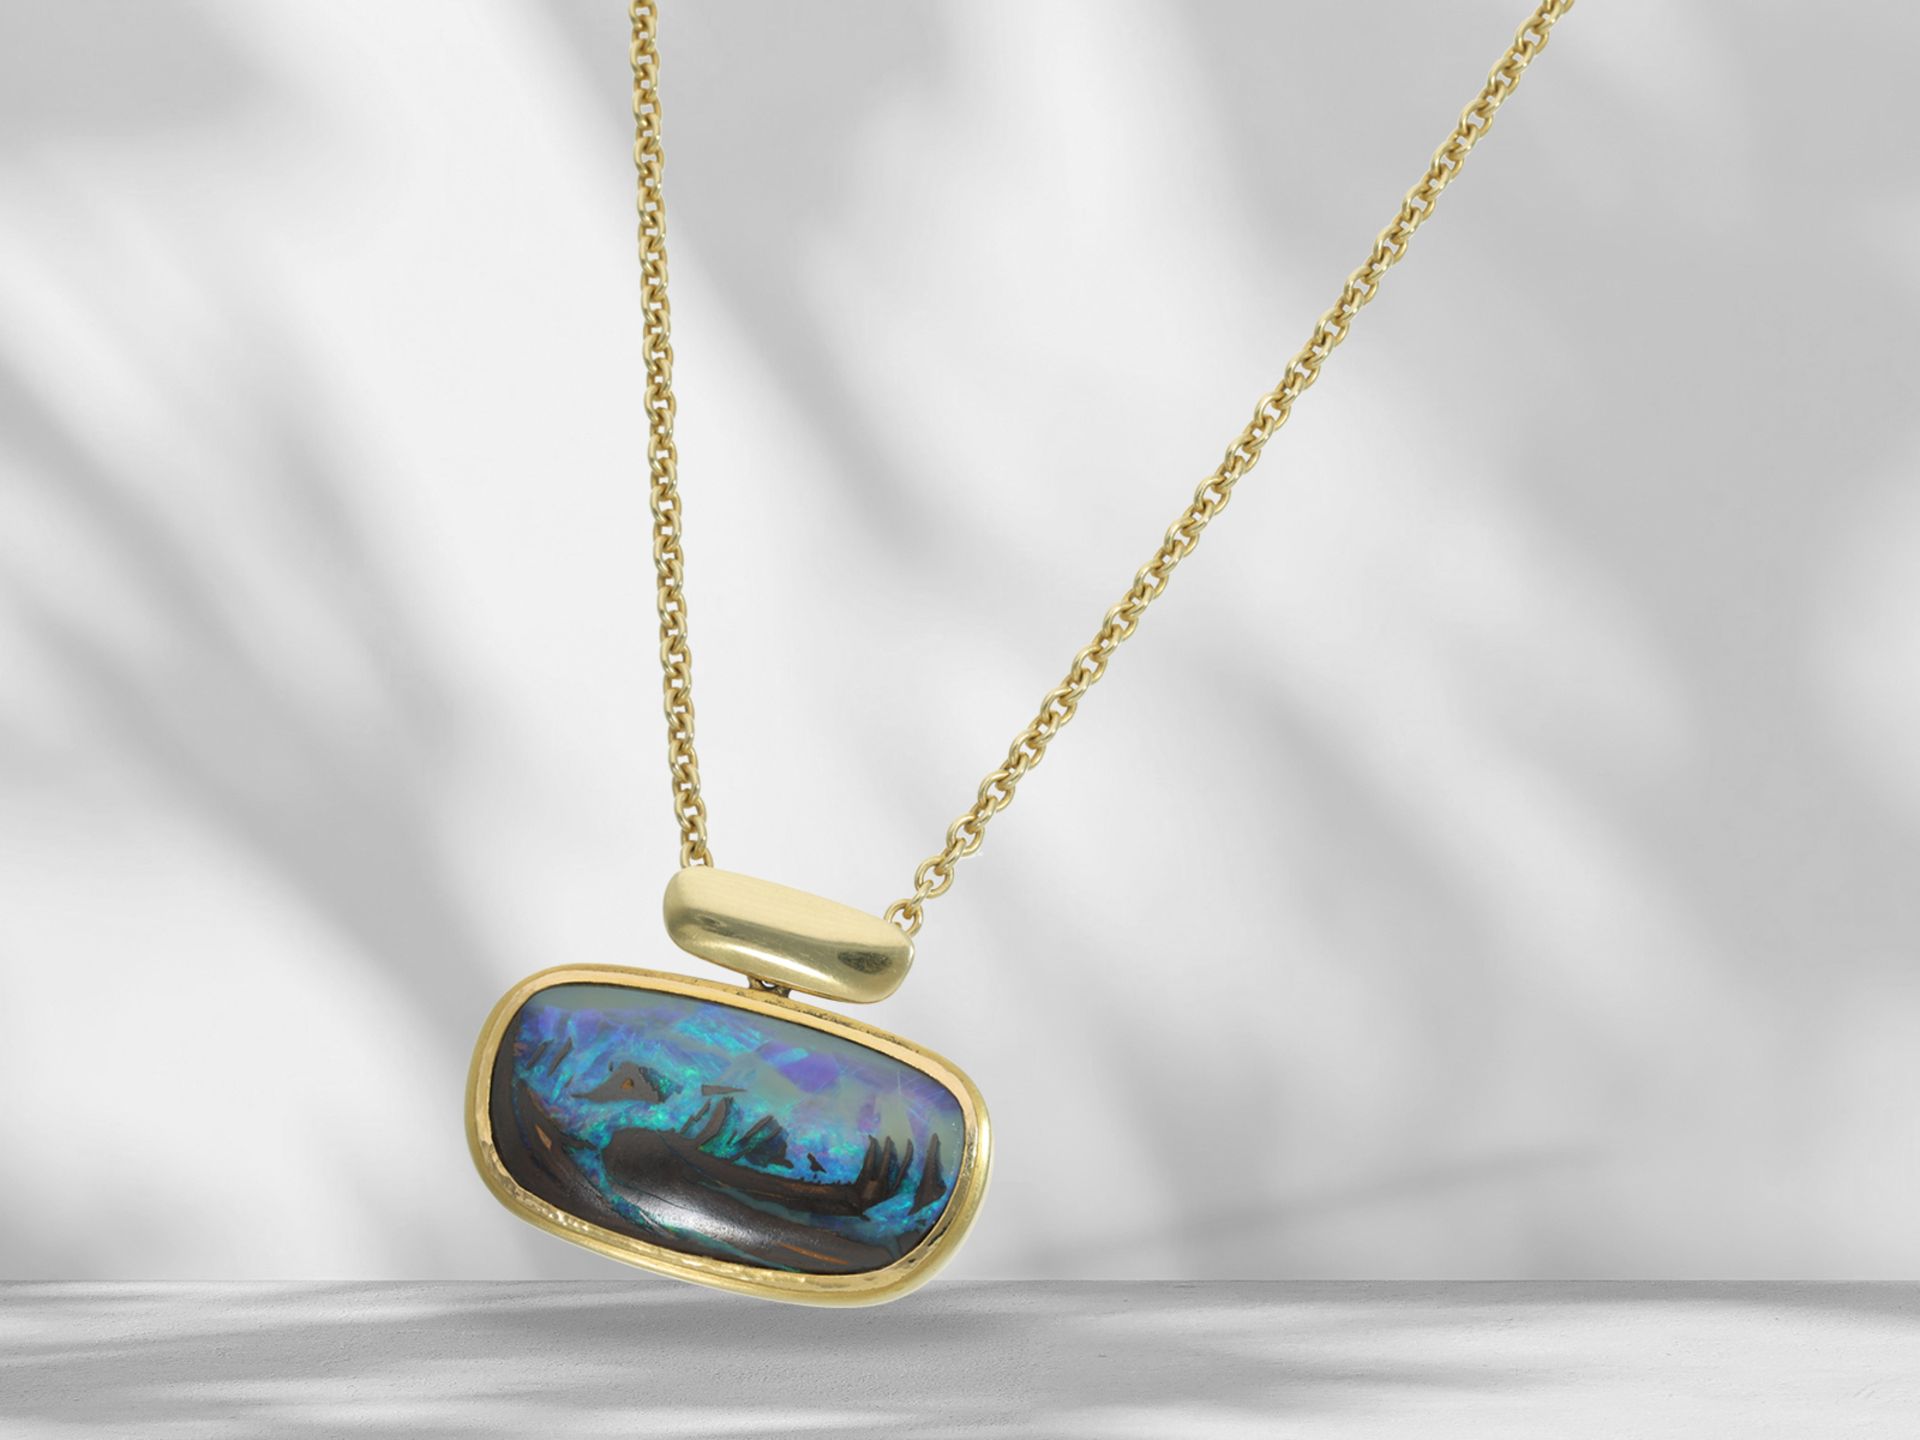 Chain/necklace: necklace with handmade vintage opal goldsmith pendant